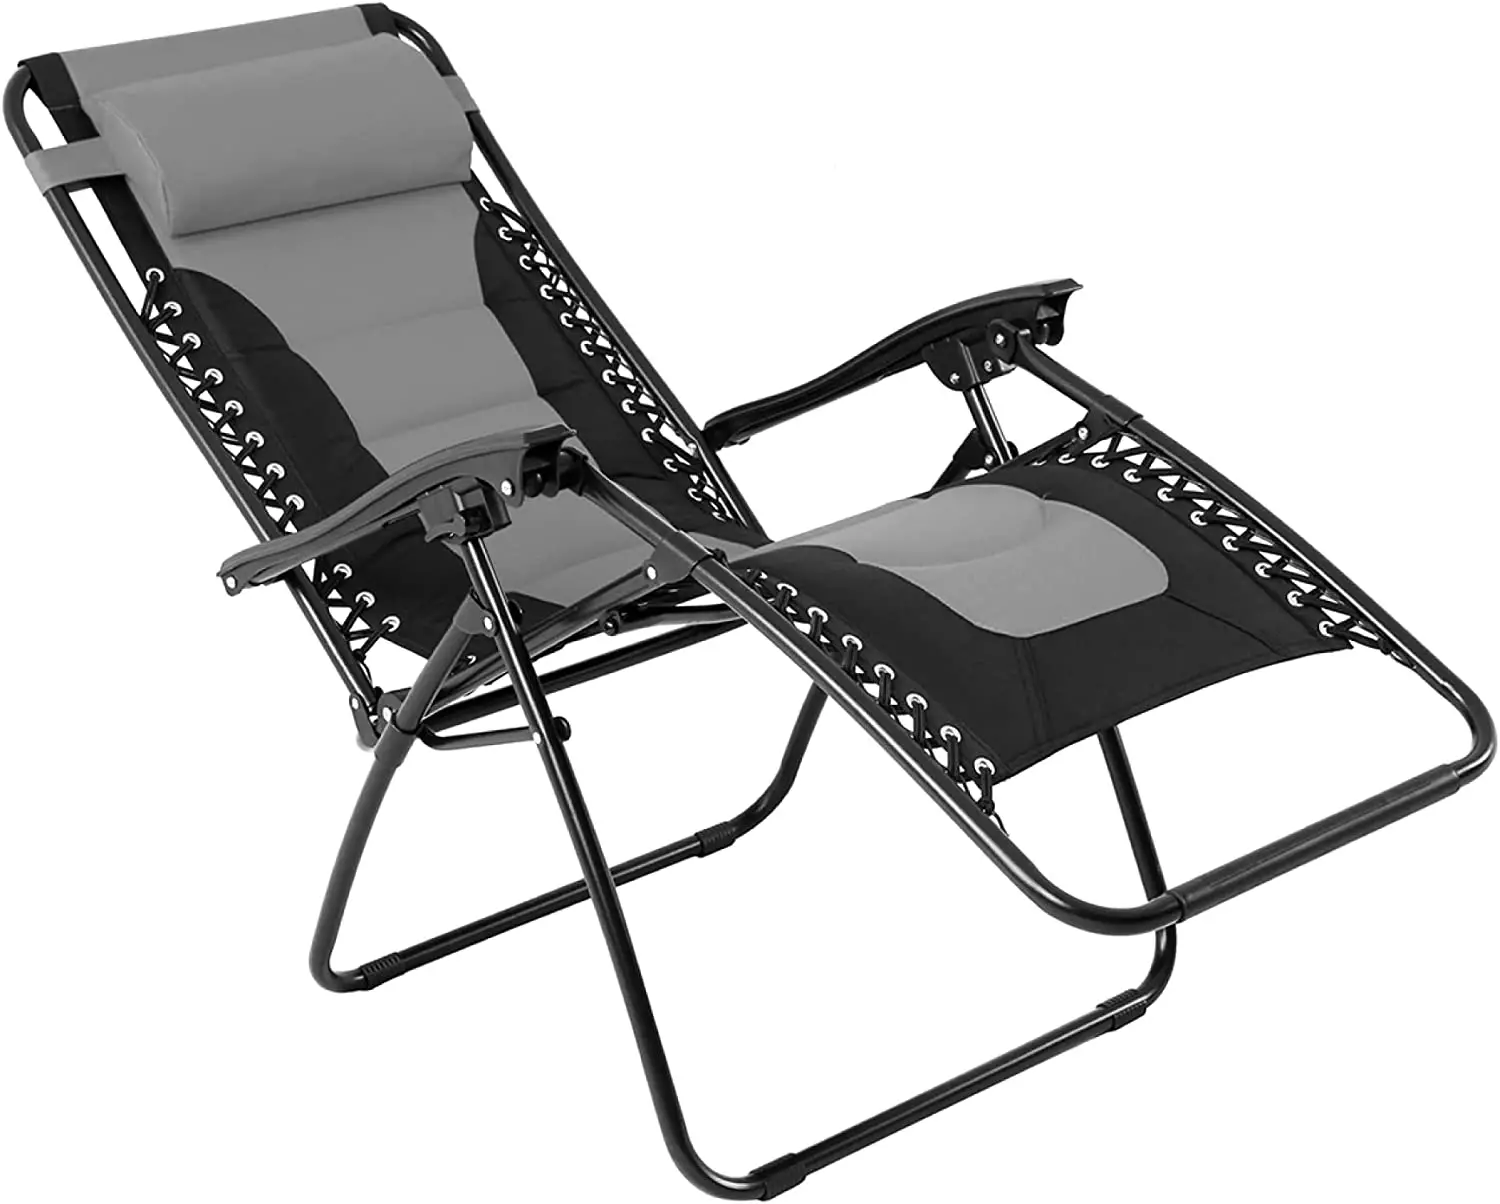 Hera's Palace Outdoor Reclining Lawn Chair